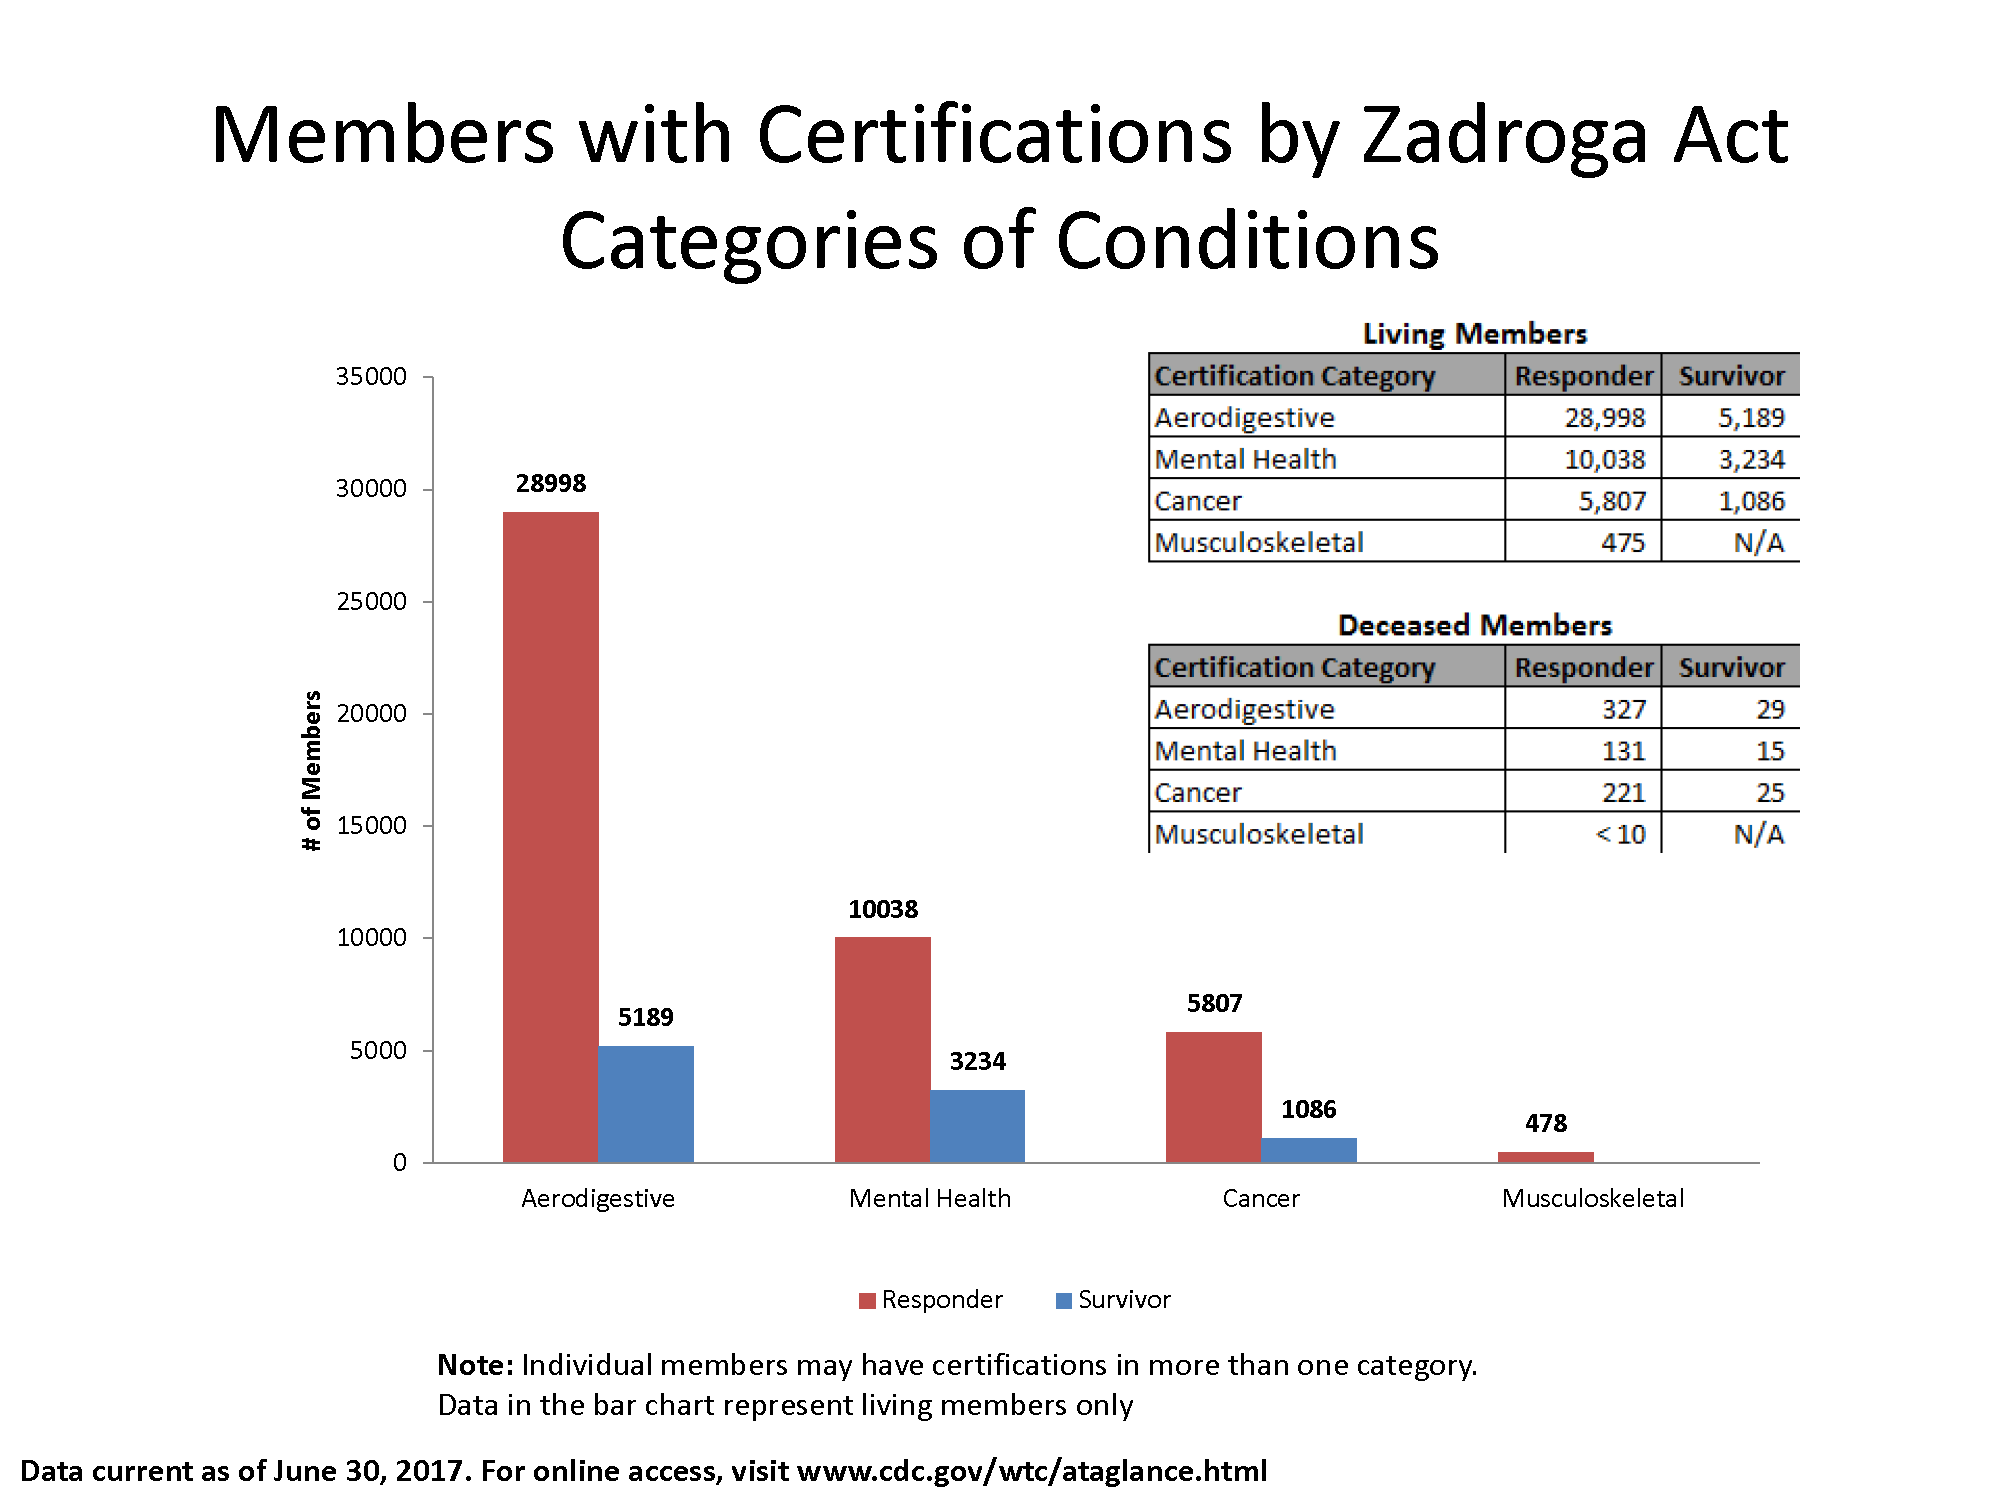 Bar graph detailing living members with certifications by Zadroga Act Categories of Conditions.

As of June 30, 2017, there were 28,998 Responders and 5,189 Survivors with Aerodigestive Conditions.

There were 10,038 Responders and 3,234 Survivors with Mental Health conditions.

There were 5,807 Responders and 1,086 Survivors with Cancer conditions.

There were 475 Responders with Musculoskeletal conditions.